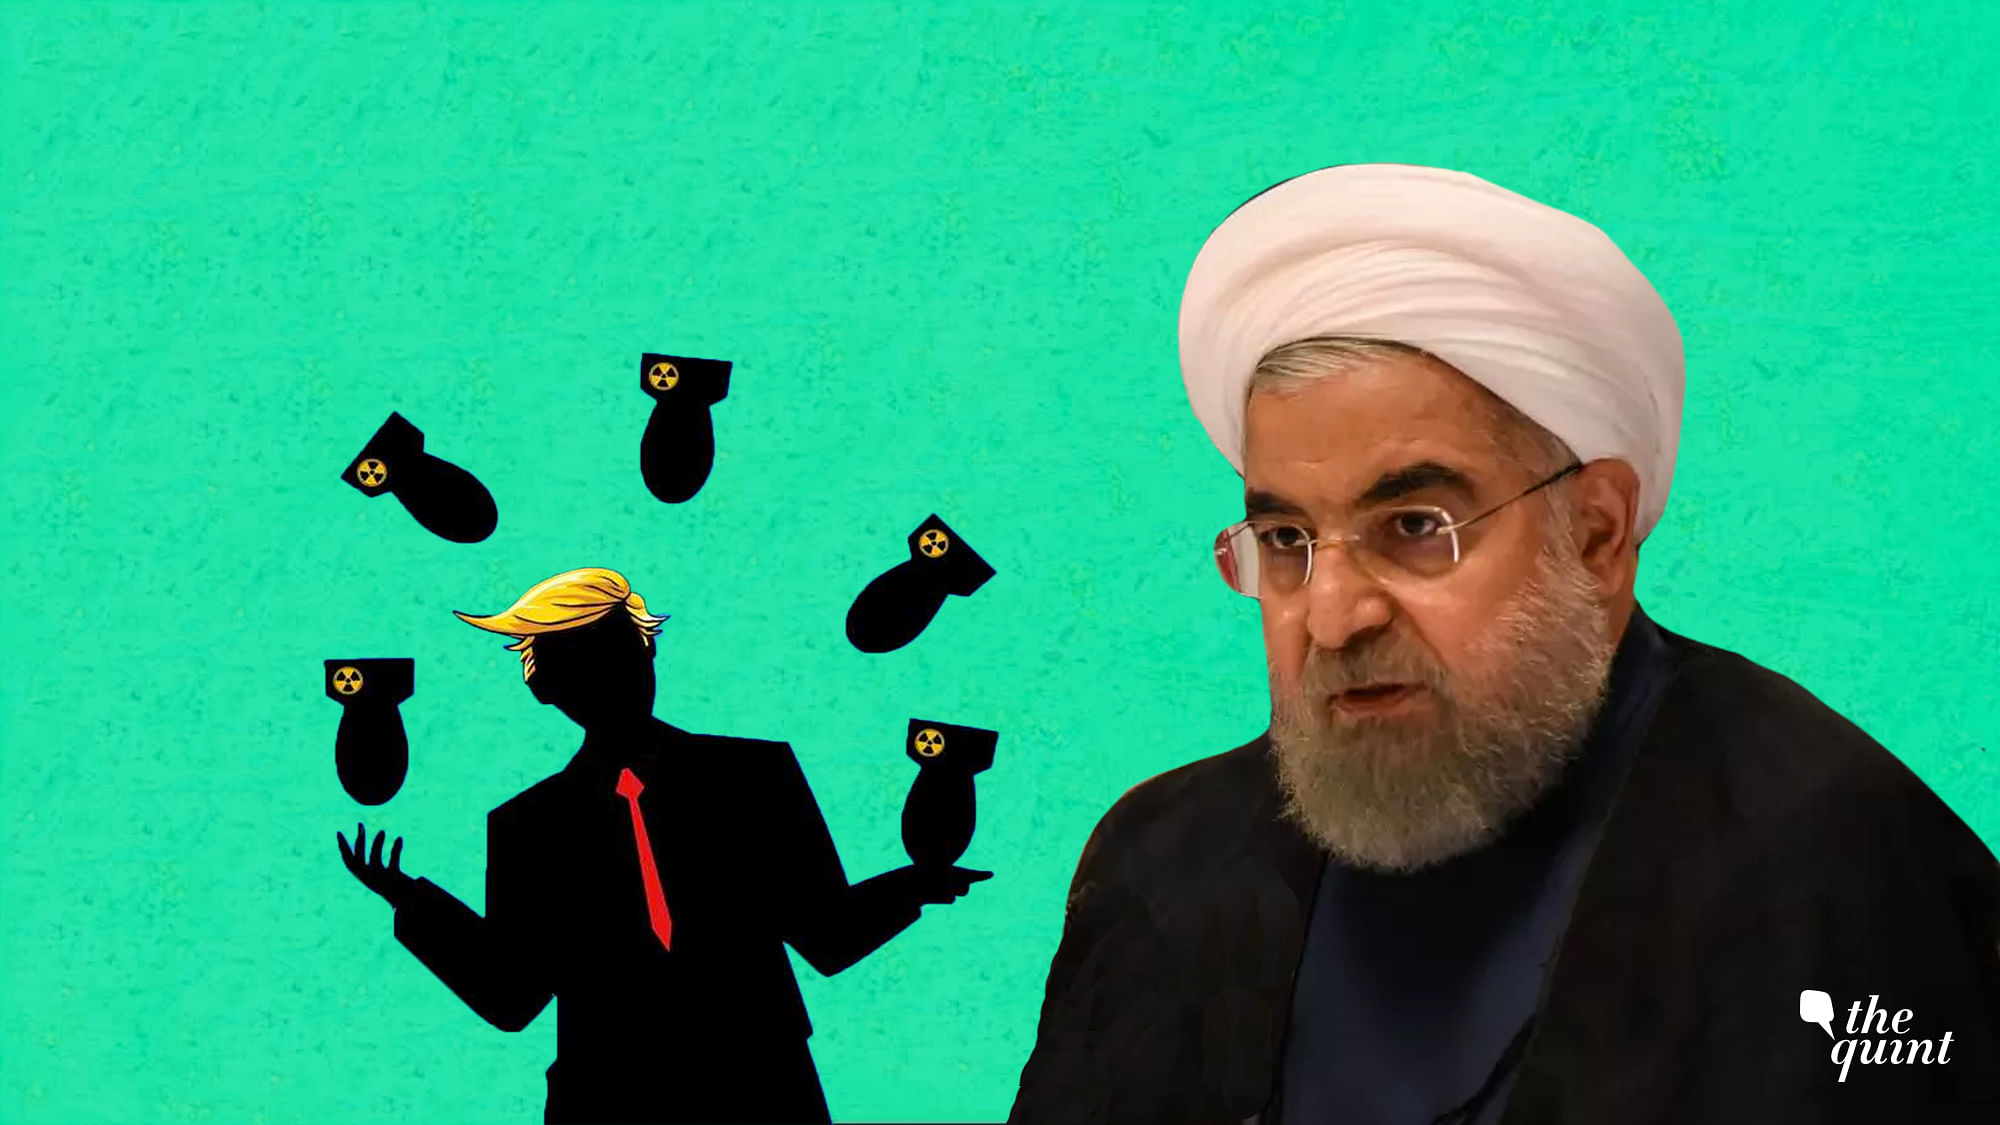 Image of President of Iran, Hassan Rouhani, and an artist’s impression of US President Trump used for representative purposes.